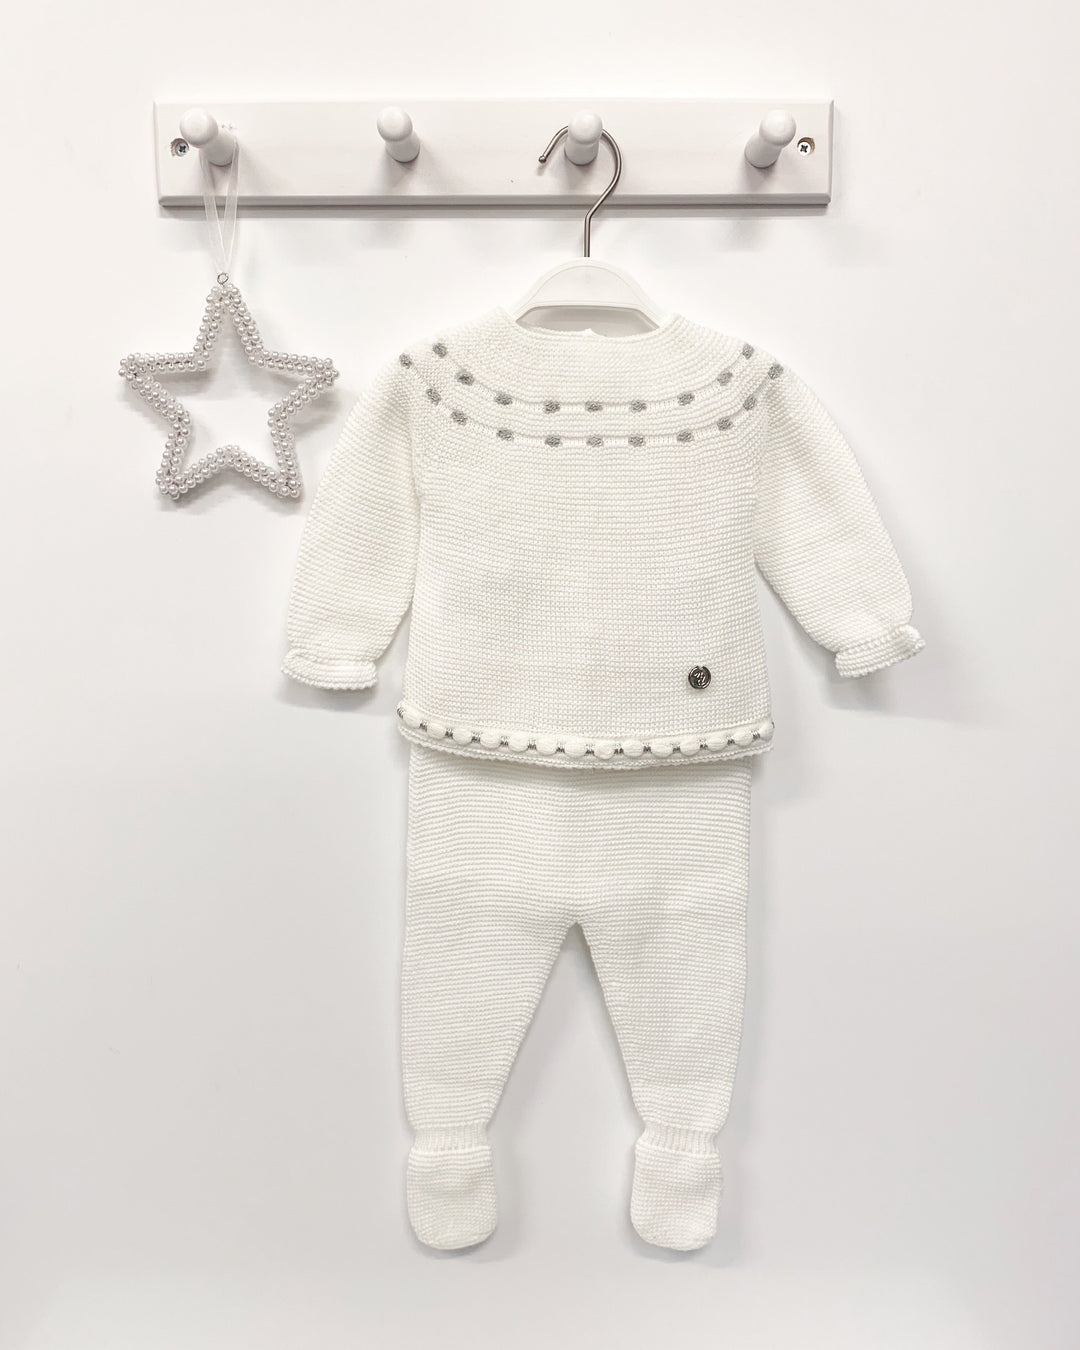 Nico Dingo Ivory & Silver Knitted Top and Leggings | Millie and John